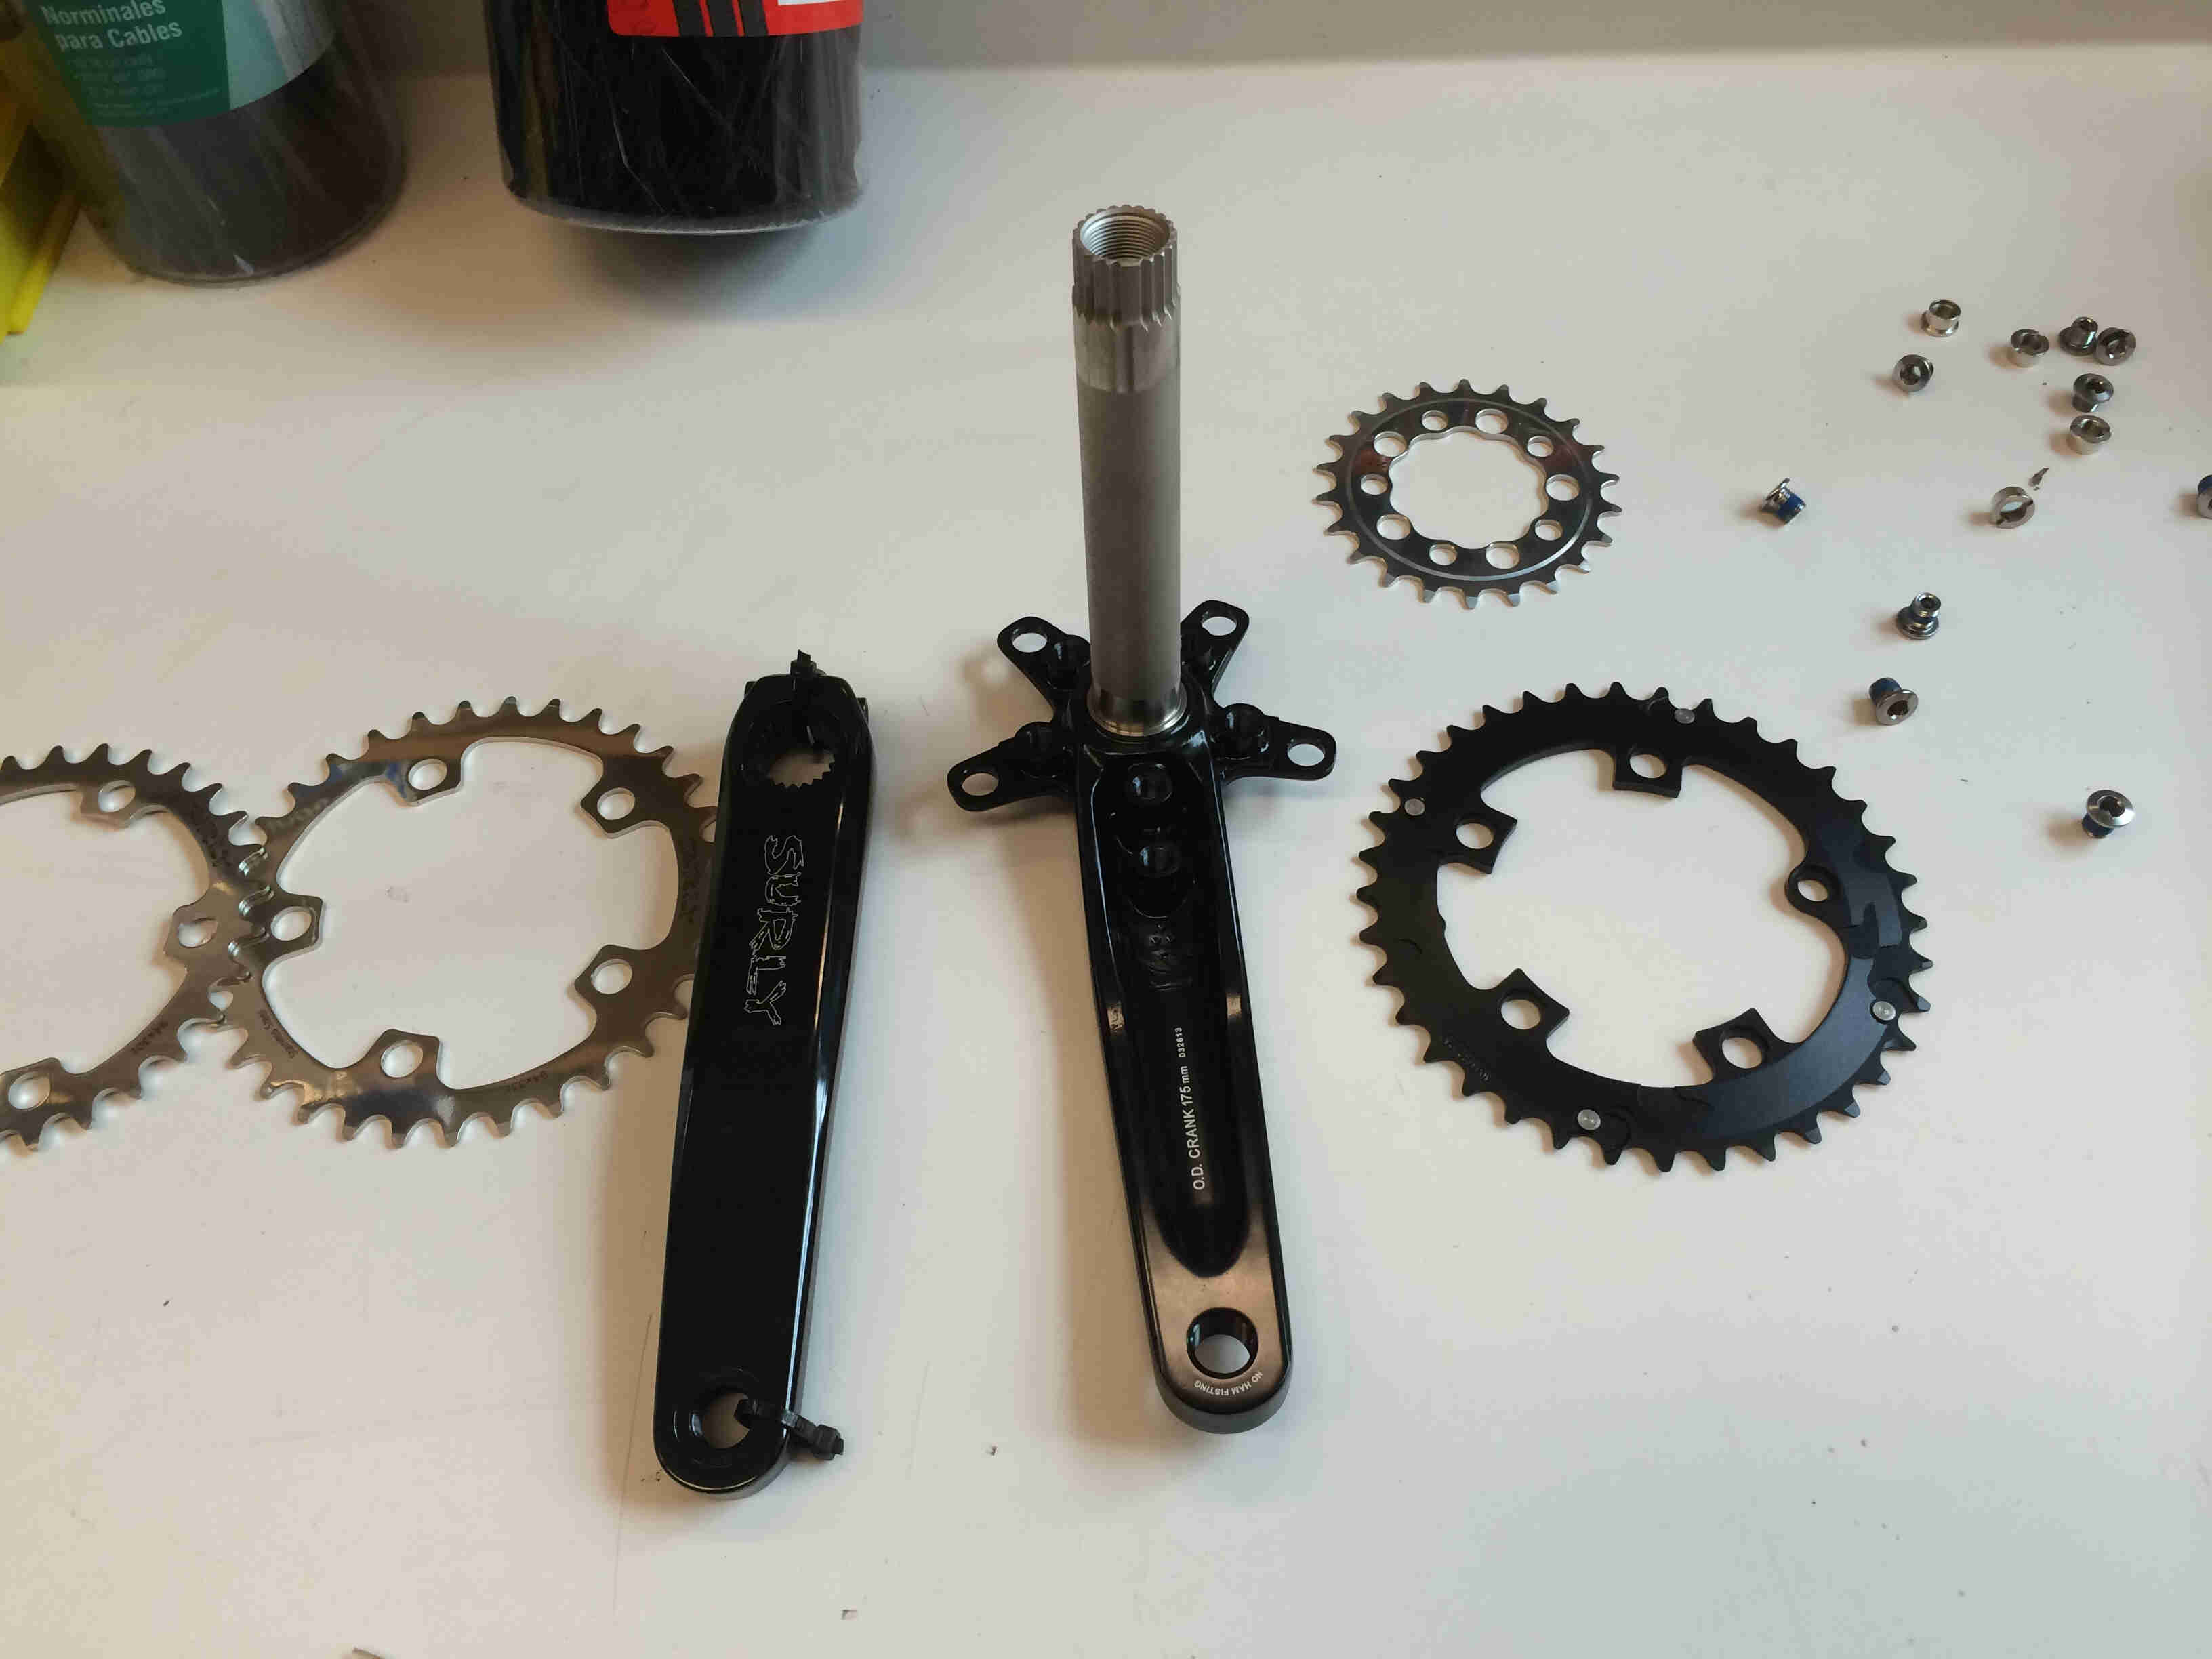 Downward view of Surly Bikes O.D Crankset and chainrings, fully disassembled, on a table